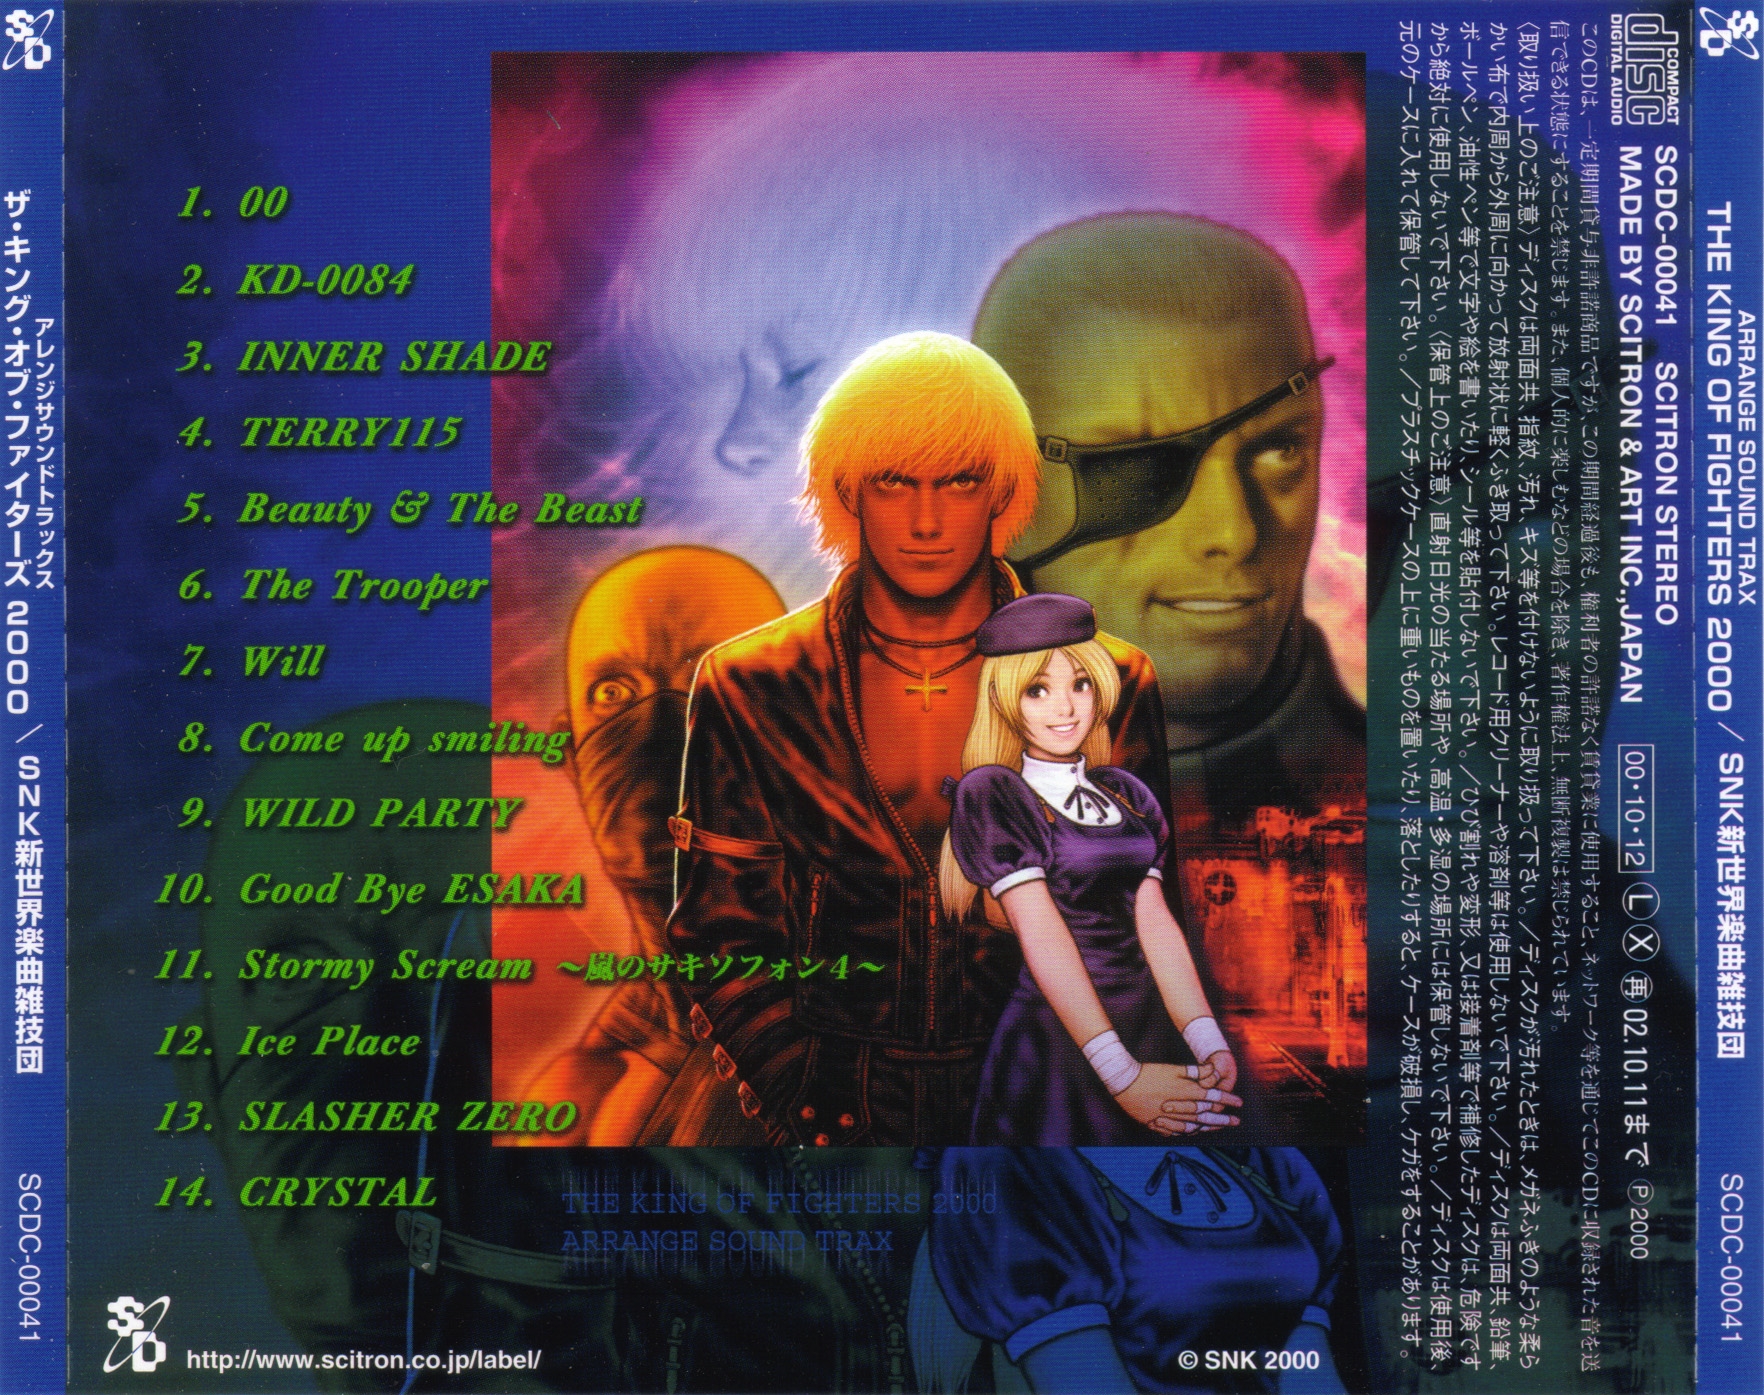 THE KING OF FIGHTERS 2000 ARRANGE SOUND TRAX (2000) MP3 - Download 